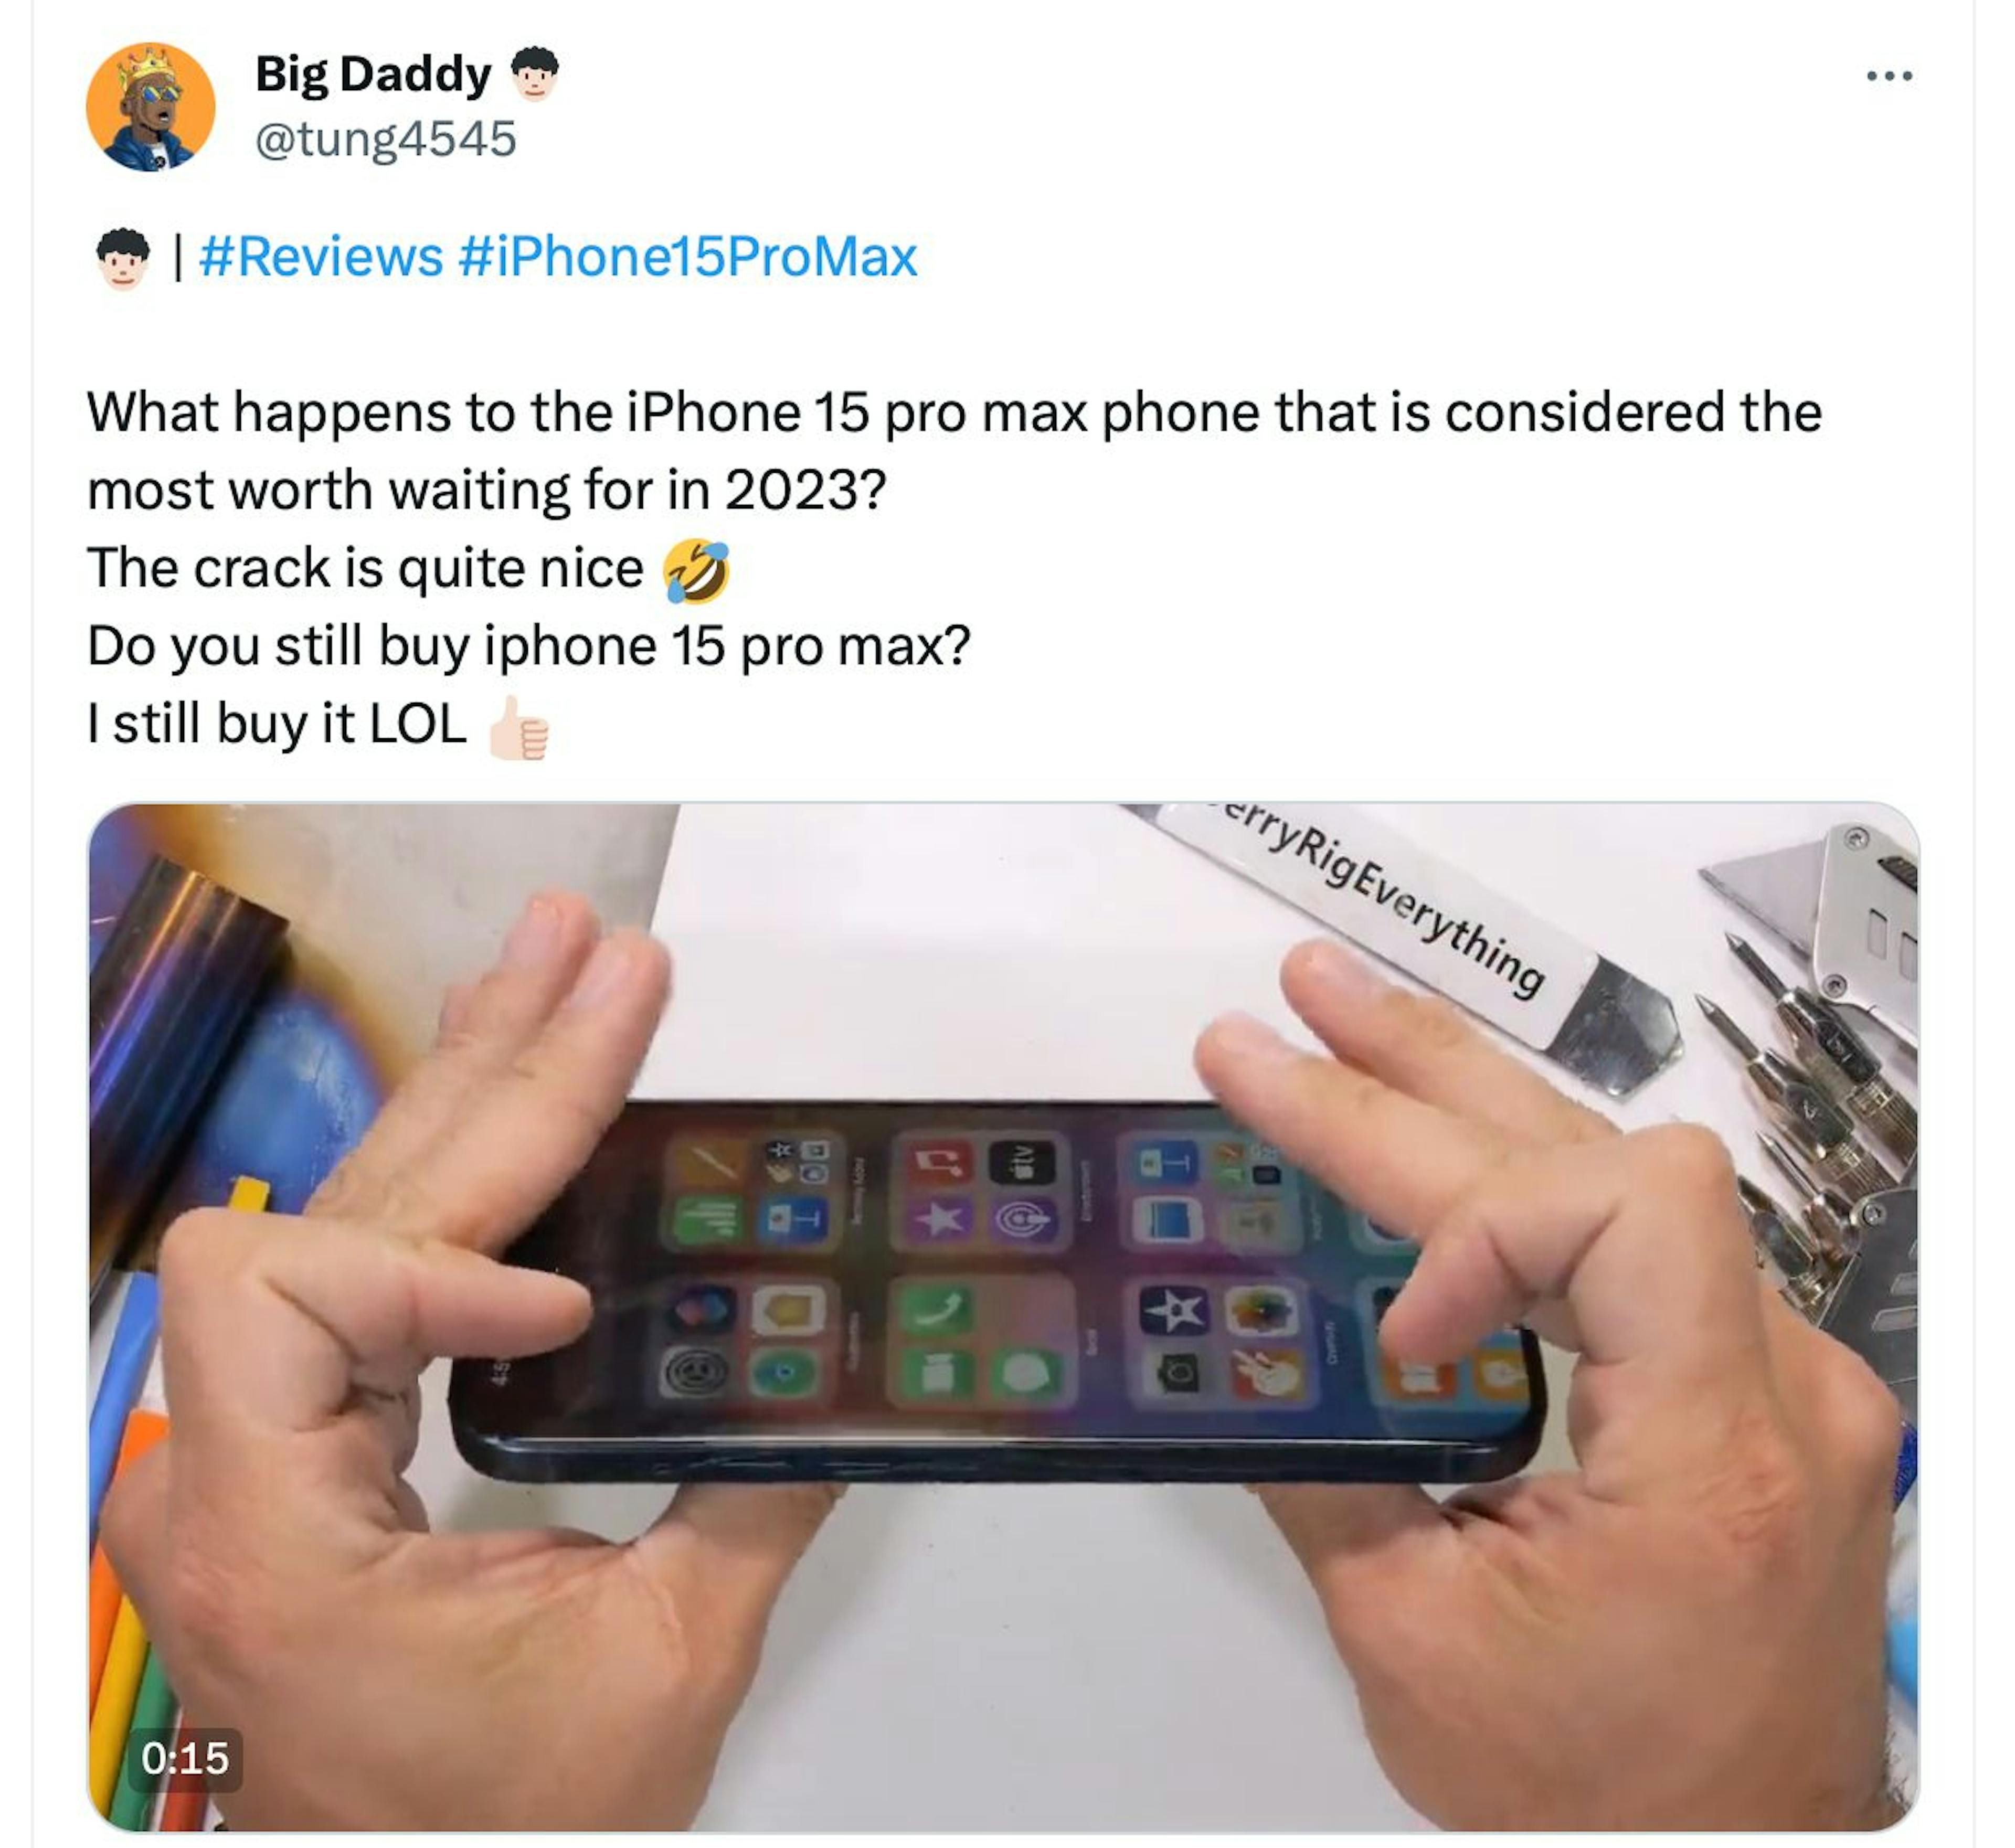 Review on the iPhone 15 on Twitter